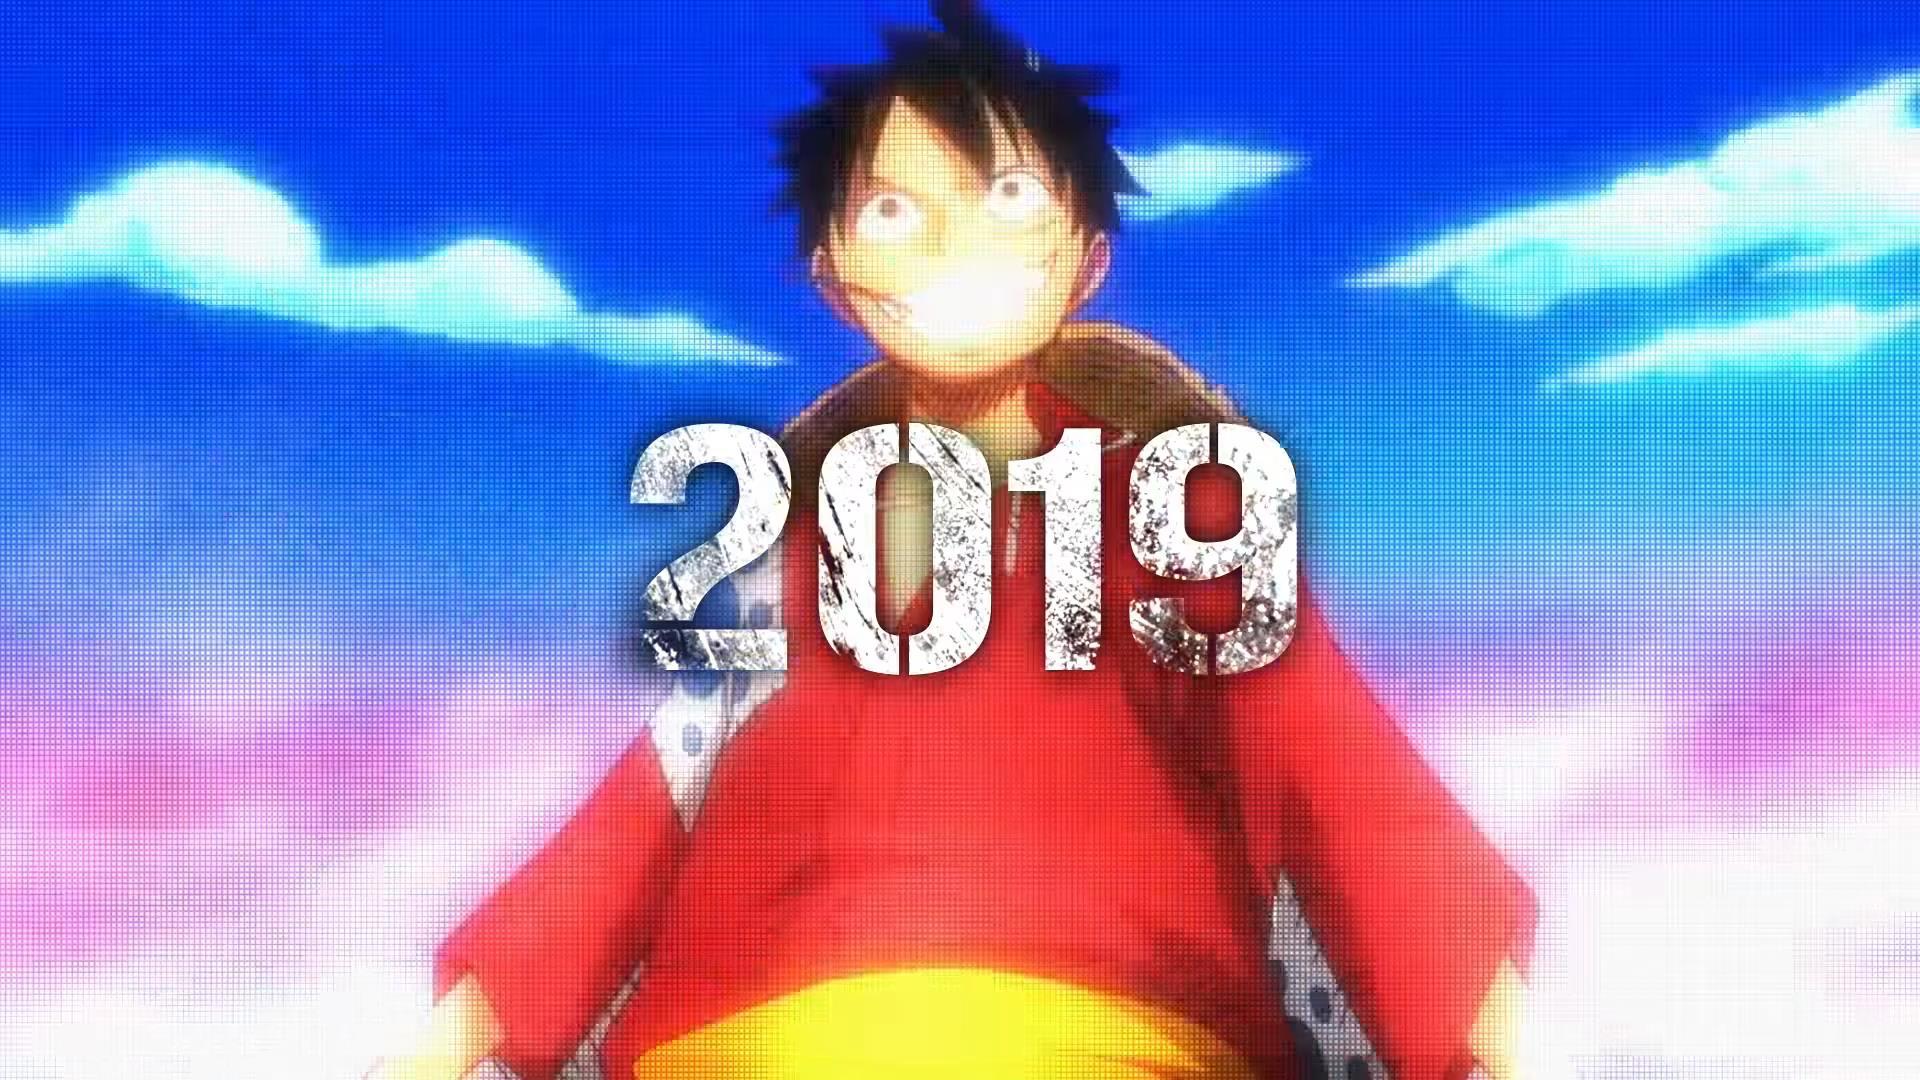 Emotional One Piece Anniversary Teases New Adventures in 2019